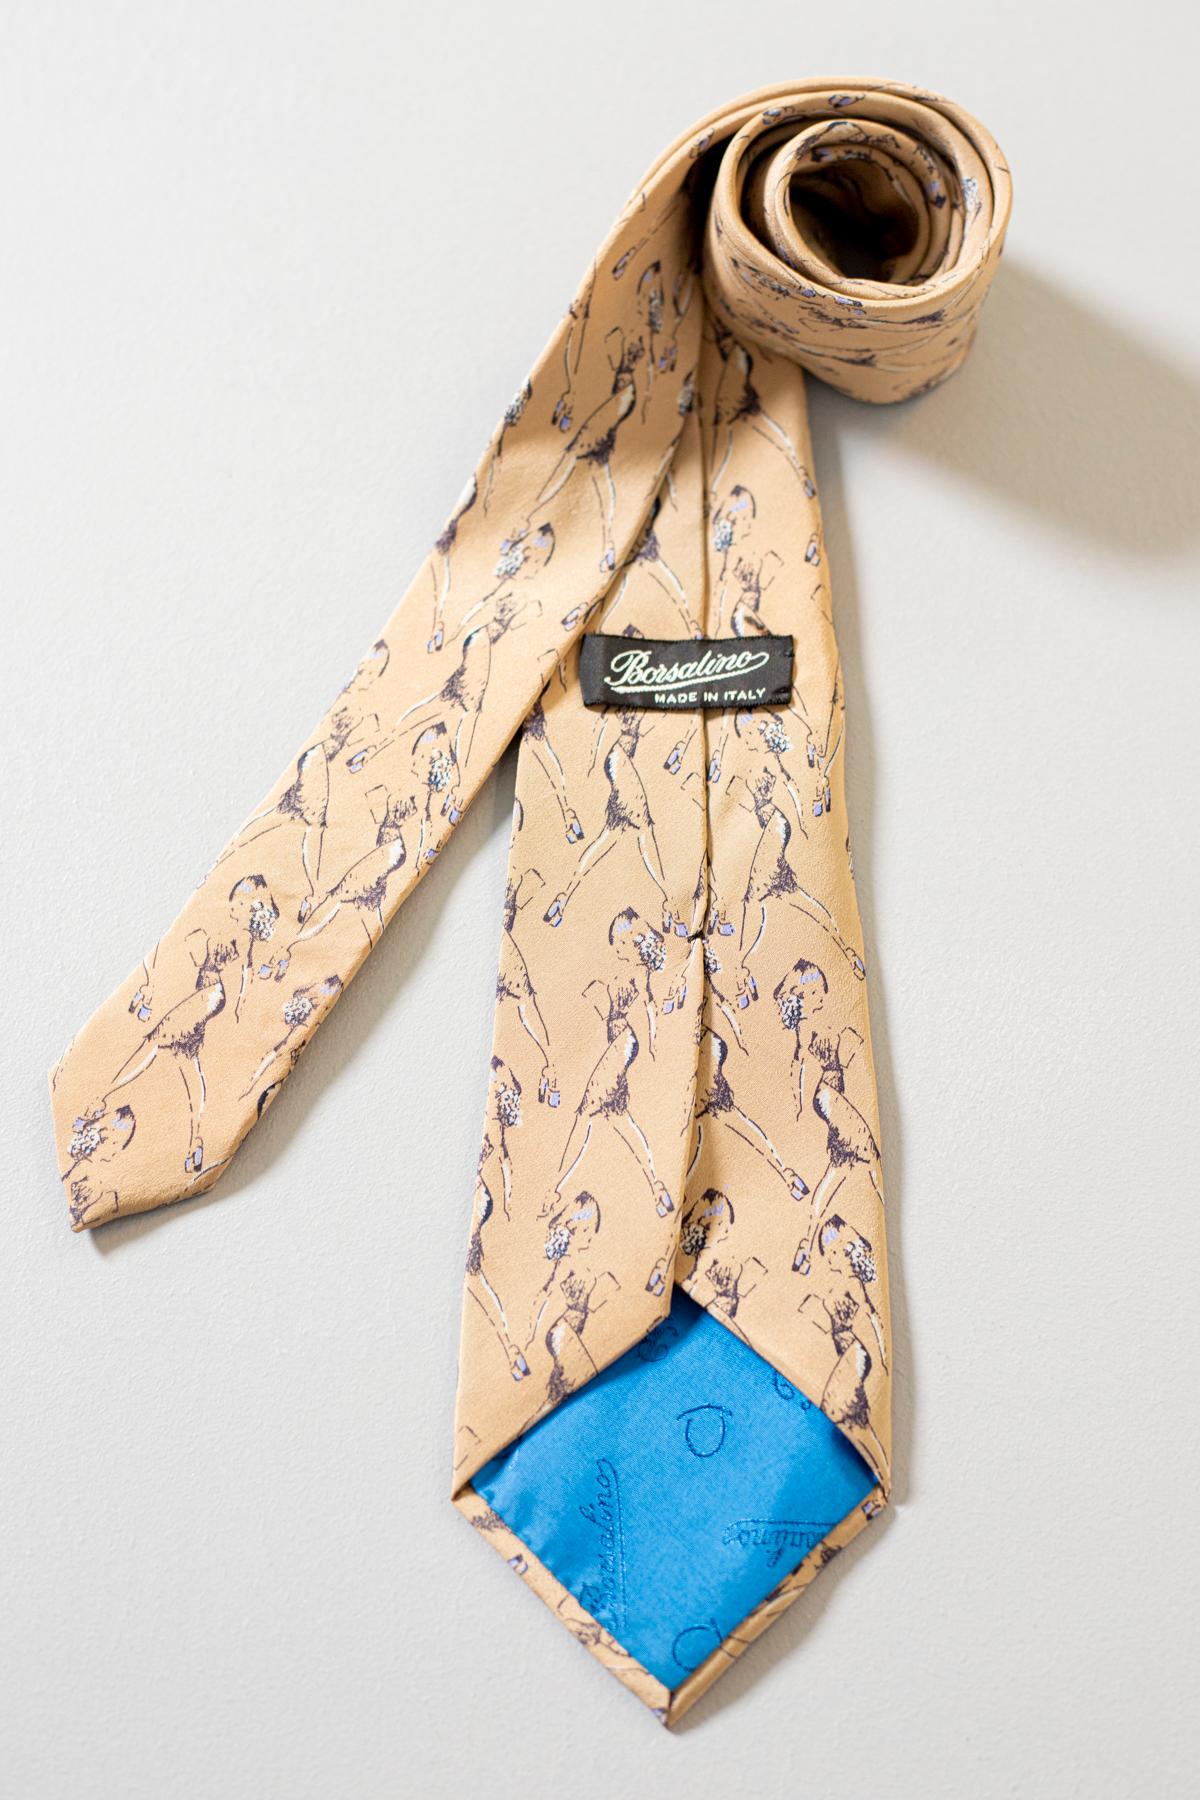 Particular vintage tie designed by Borsalino, it is made of 100% silk, for this reason the fabric is very soft. Decorated with drawings of the profile of a woman walking on a beige background, the beauty of this accessory lies precisely in these